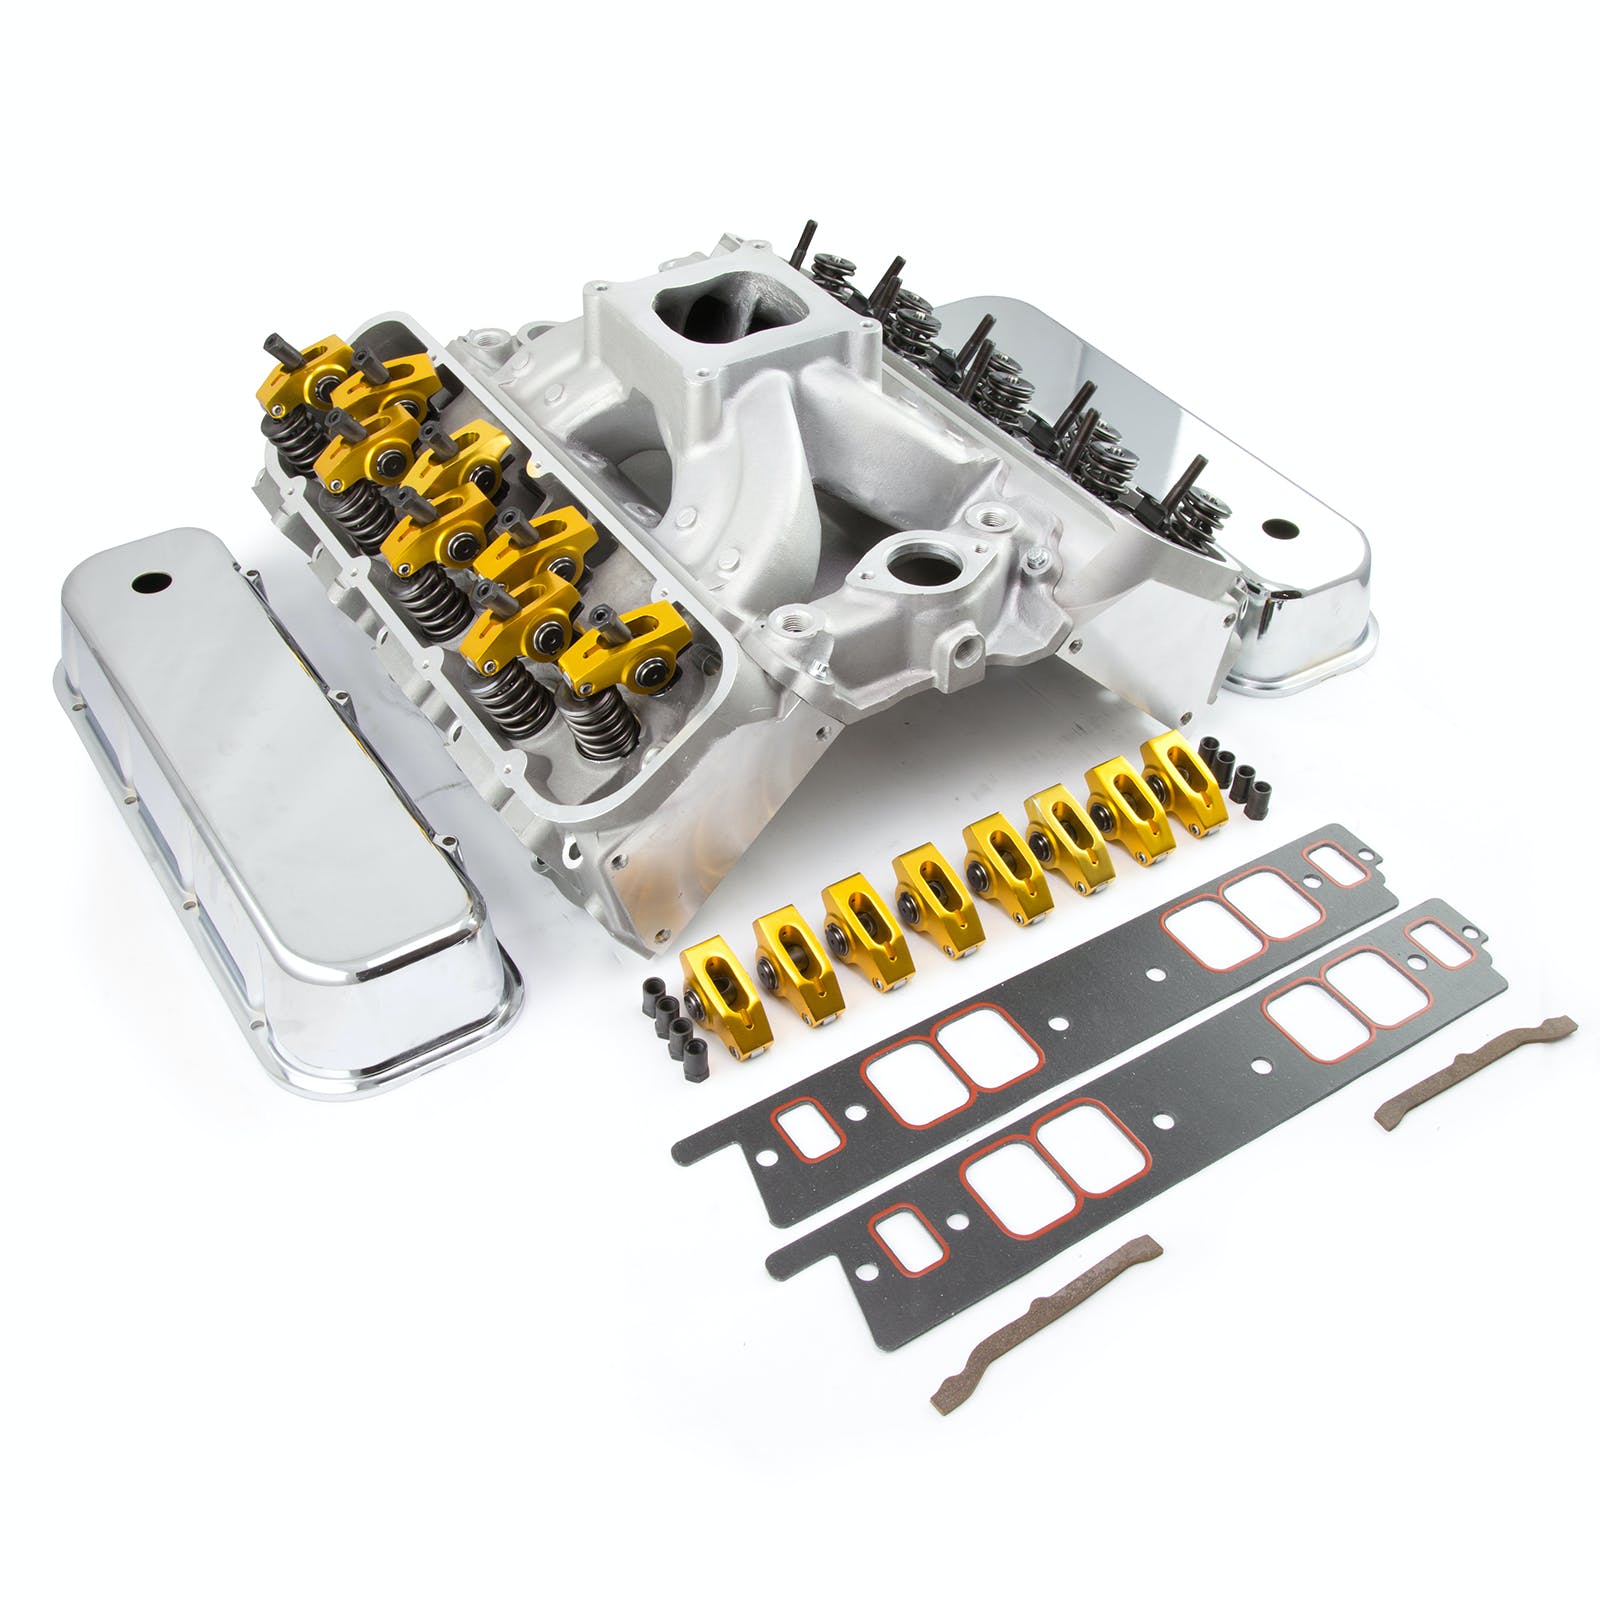 Speedmaster PCE435.1017 Solid FT Cylinder Head Top End Engine Combo Kit